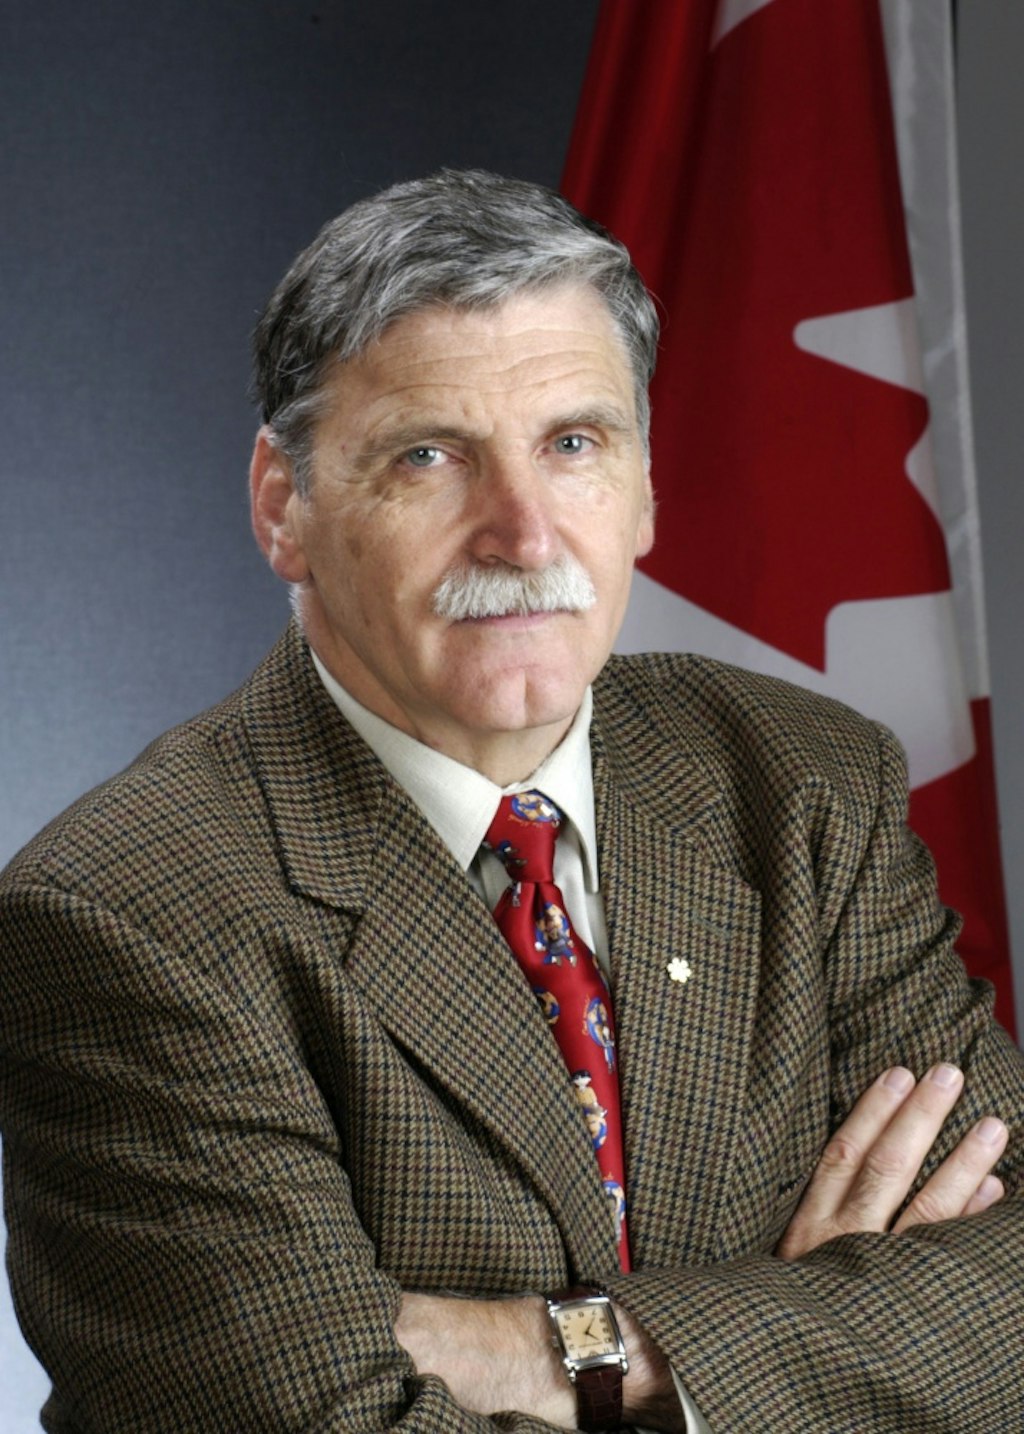 Senator Romeo Dallaire Speaks Out about the Baha’is